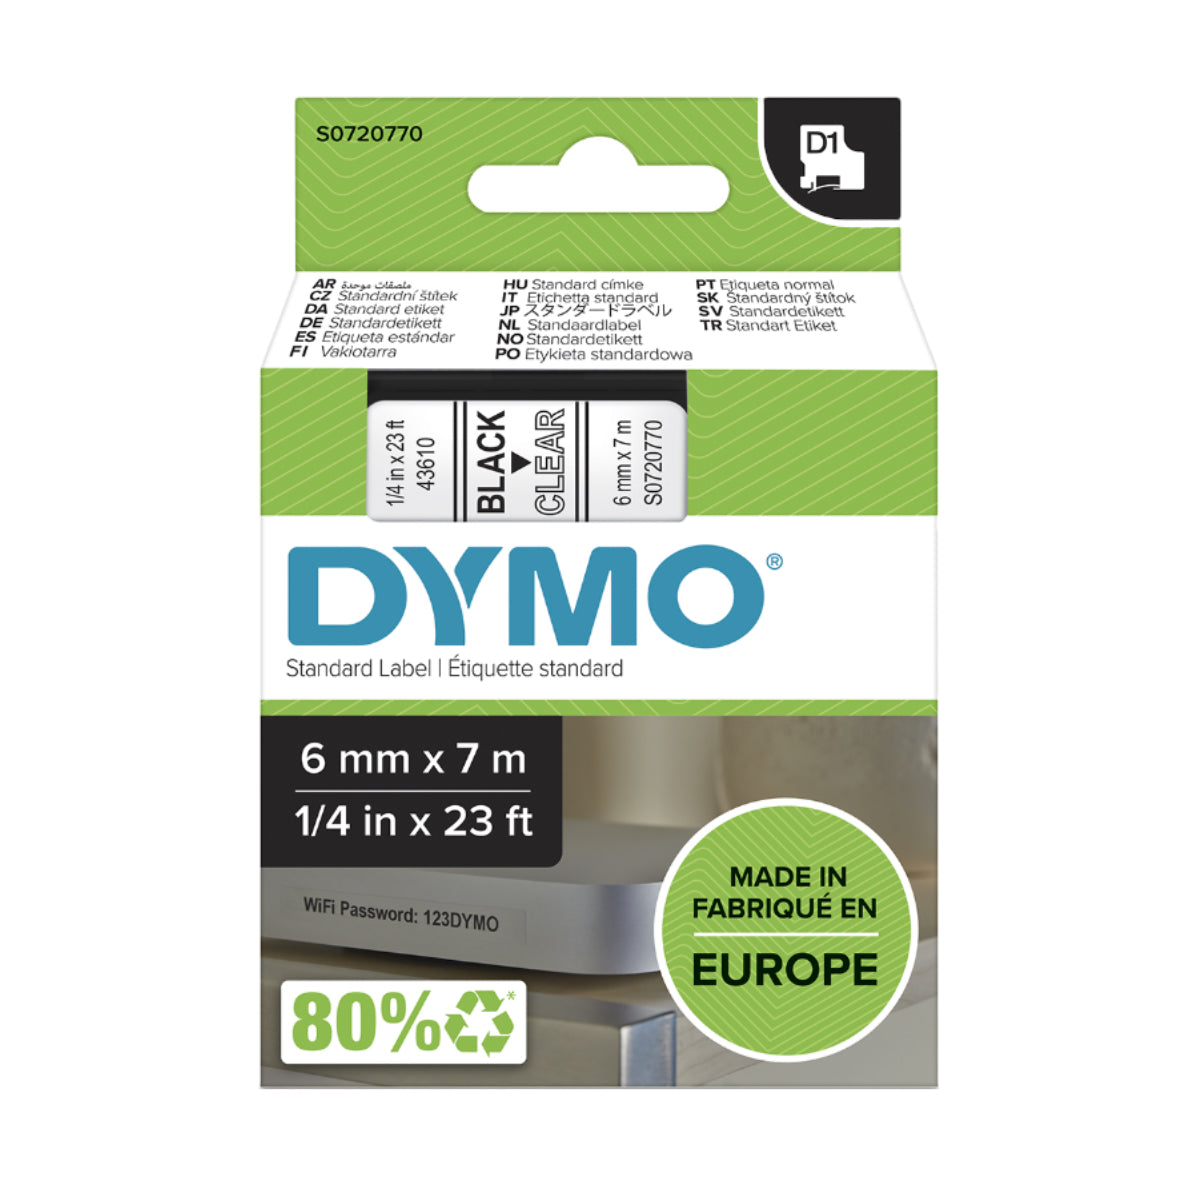 DYMO Standard D1 Labeling Tape for LabelManager Label Makers, Black print  on Clear tape, 4'' W x 23' L, cartridge 43610 4